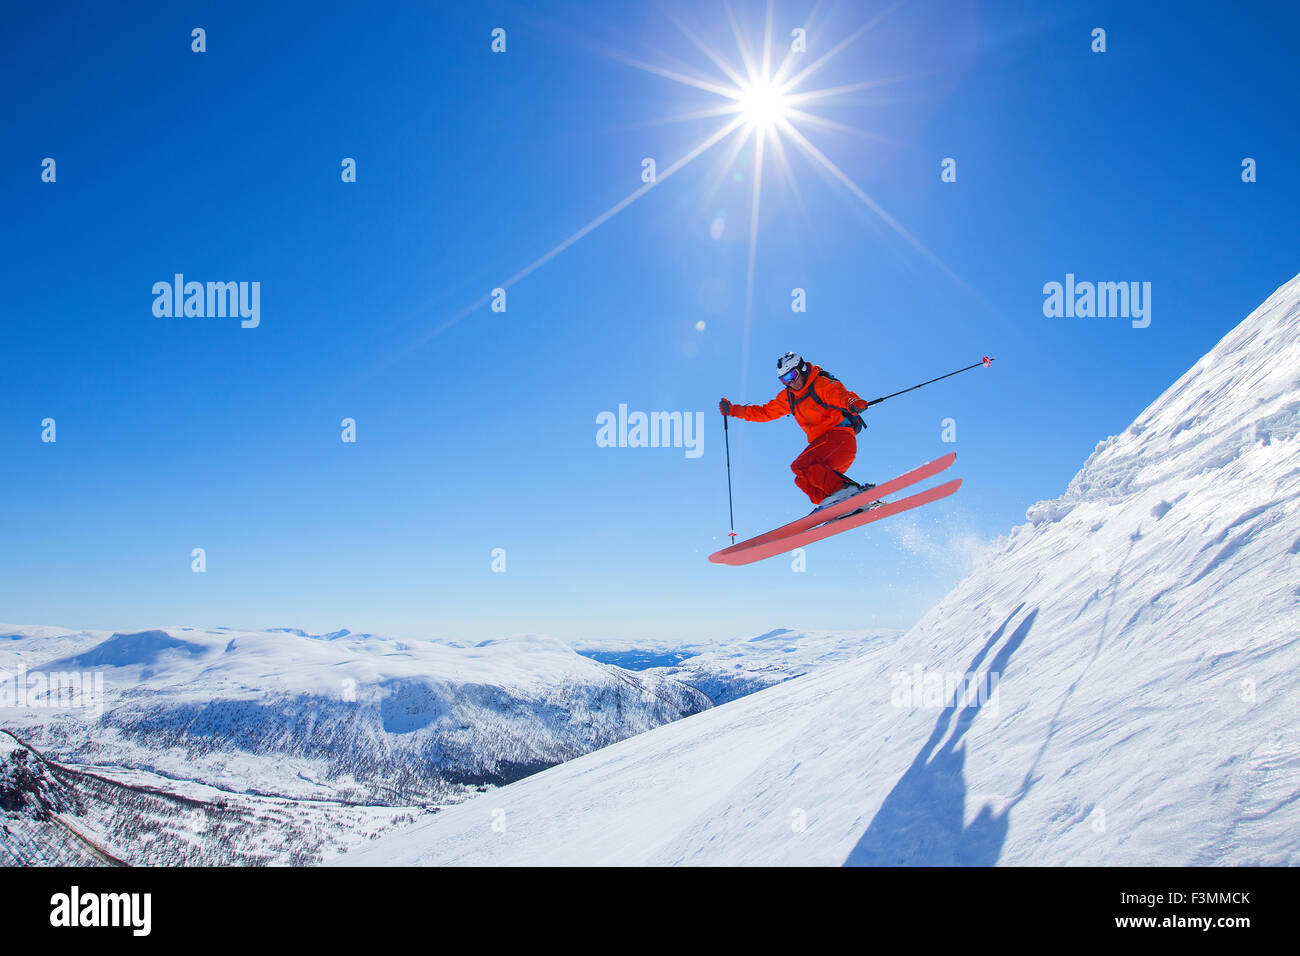 A male freerider in a red suit is jumping from a snow ridge. The sun is shining, the sky is blue. Stock Photo